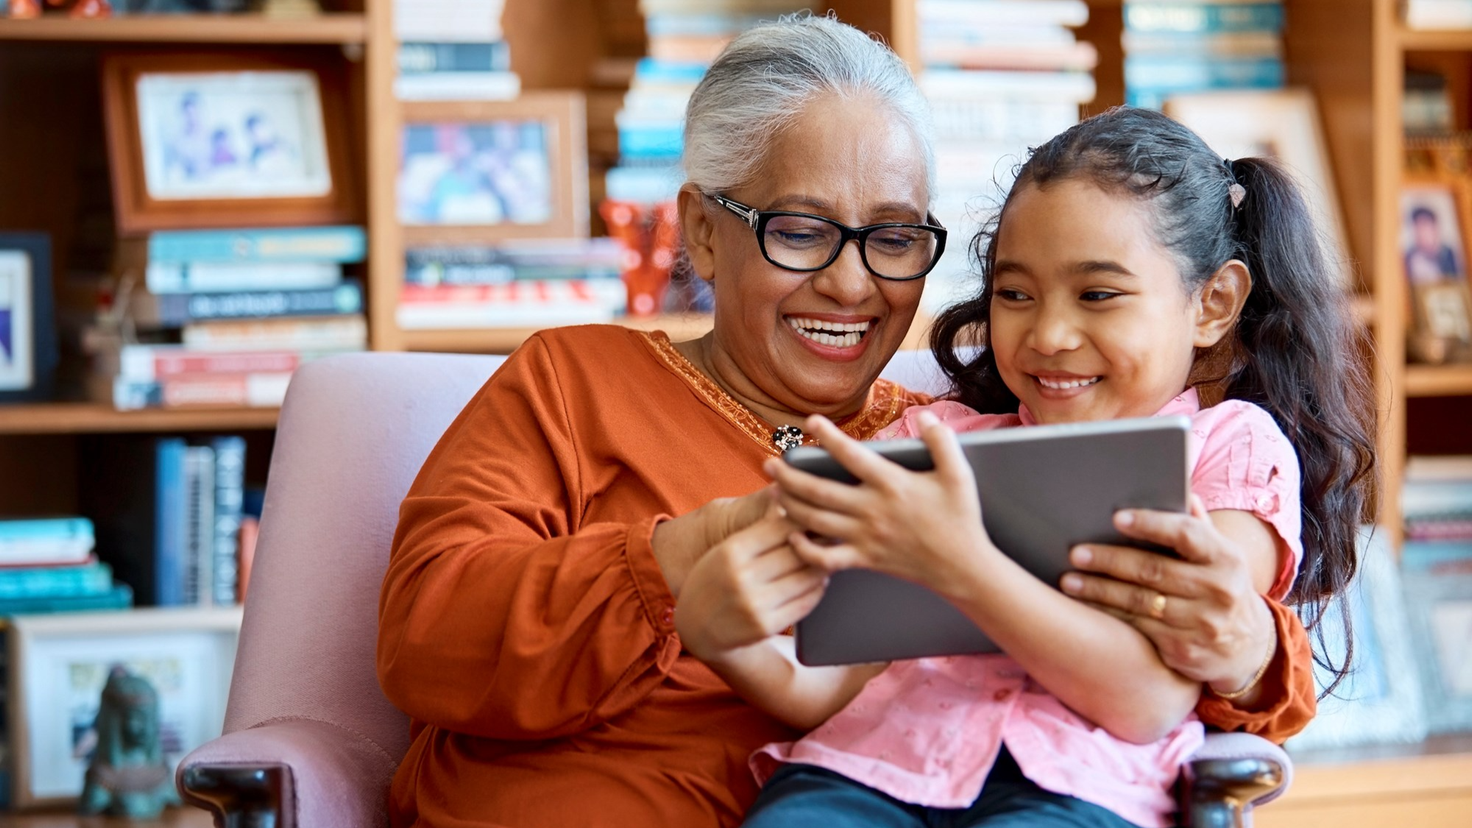 Grandmother and Grandchild Using Tablet in the Library